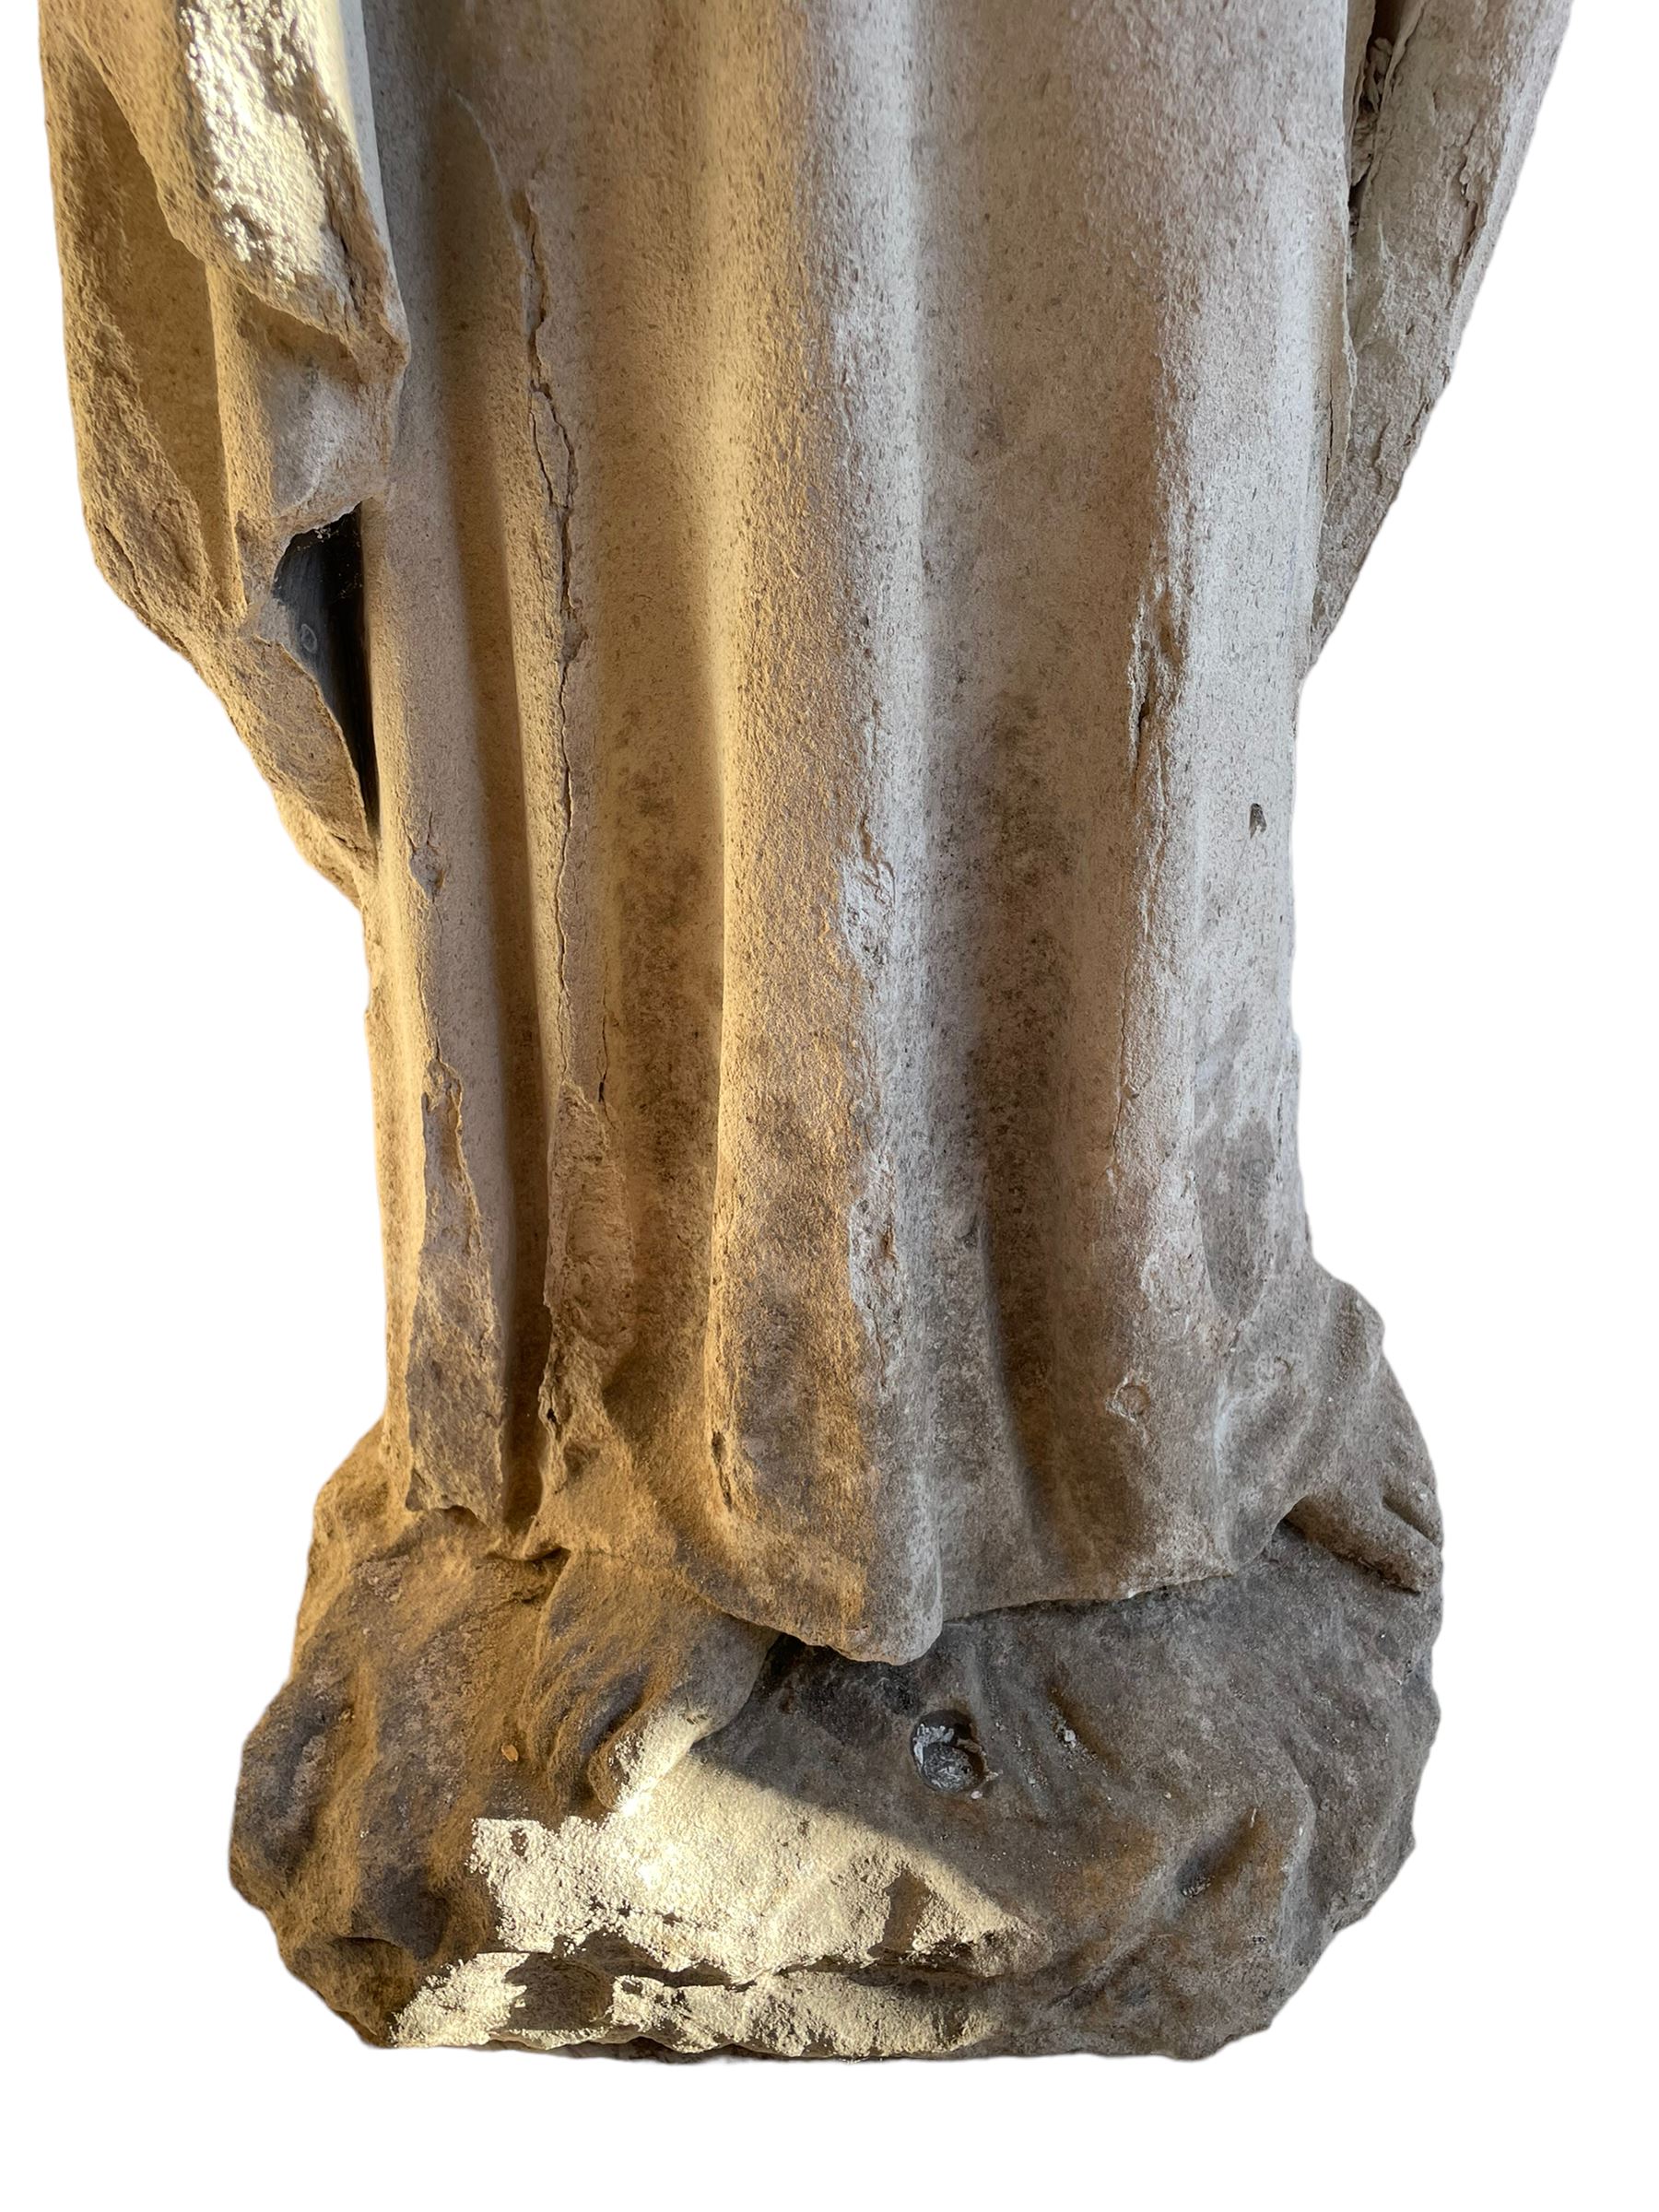 19th century weathered carved sandstone figure of Jesus Christ depicted as the Good Shepherd - Image 4 of 7